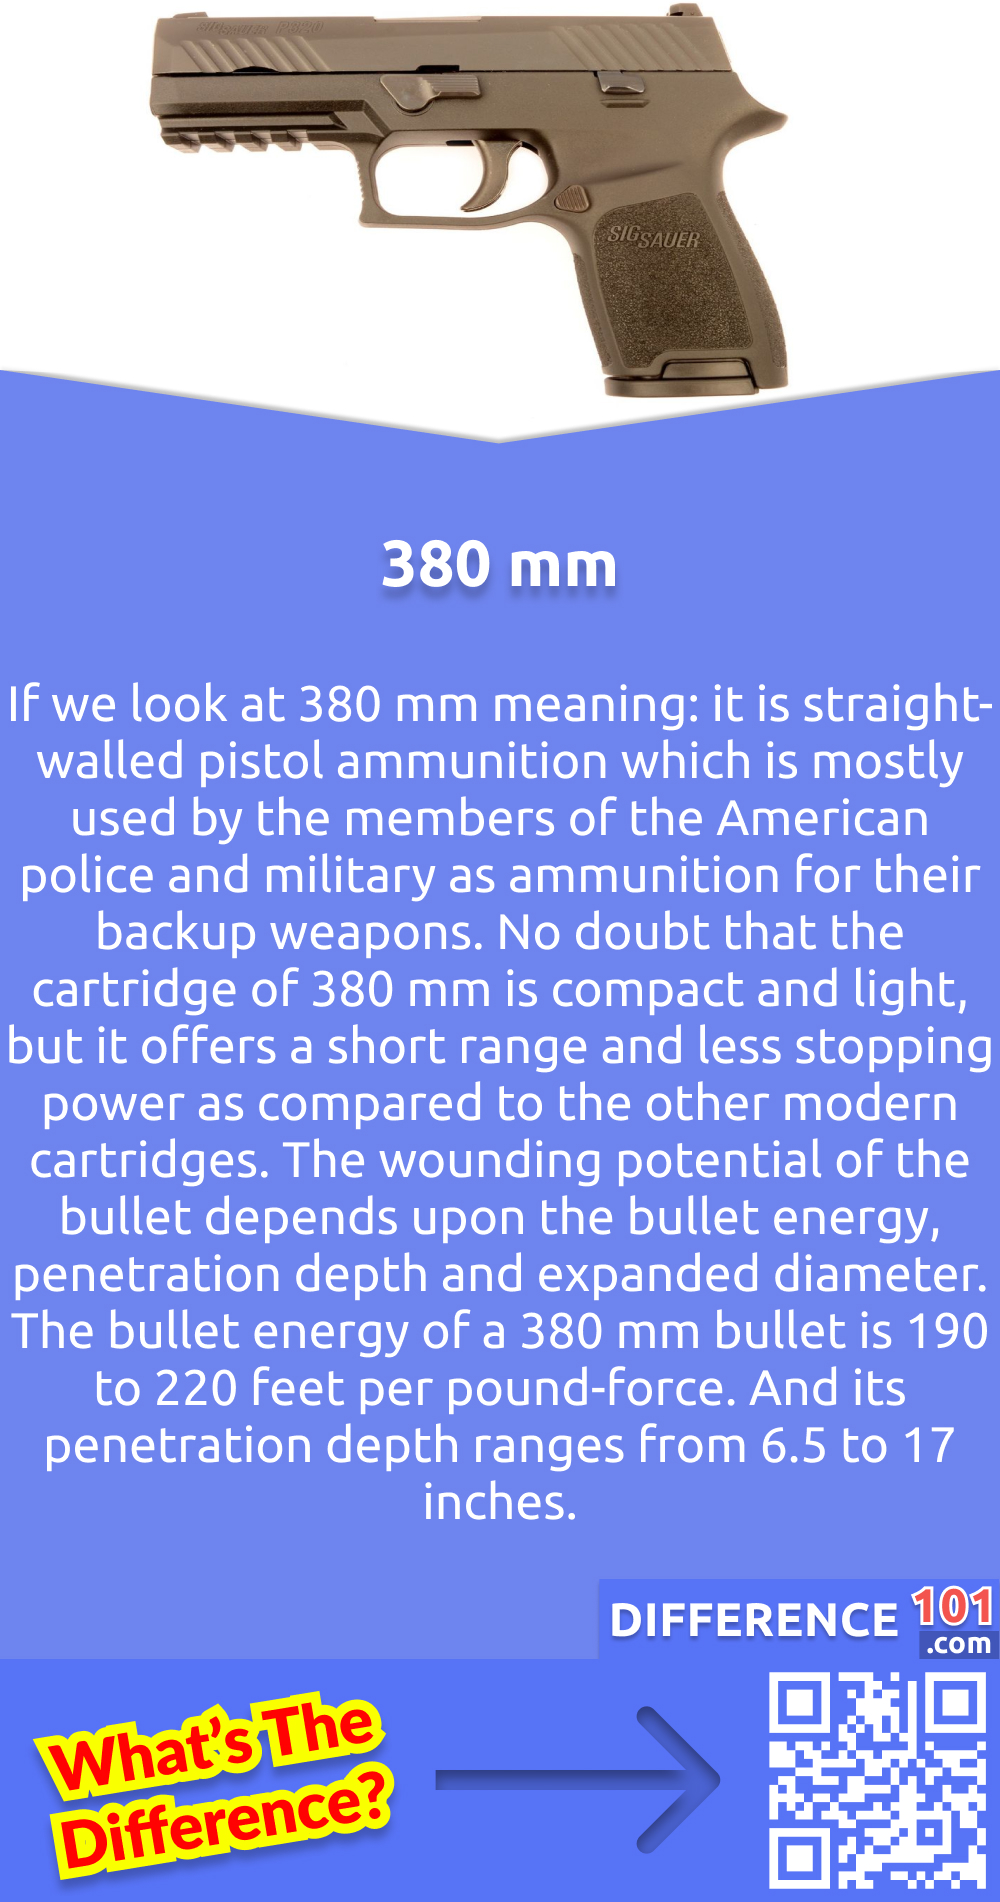 What Is 380 mm? If we look at 380 mm meaning: it is straight-walled pistol ammunition which is mostly used by the members of the American police and military as ammunition for their backup weapons. This ammunition was primarily used for self-defense by the civilians, which found it very easy to conceal and hold a good amount of rounds. No doubt that the cartridge of 380 mm is compact and light, but it offers a short range and less stopping power as compared to the other modern cartridges. 380 mm are usually used by people who prefer a lightweight, small handgun with manageable recoil. The wounding potential of the bullet depends upon the bullet energy, penetration depth and expanded diameter. The bullet energy of a 380 mm bullet is 190 to 220 feet per pound-force. And its penetration depth ranges from 6.5 to 17 inches. This ammunition was also used by Archduke Franz Ferdinand and his spouse Sophia at the event during World War I.